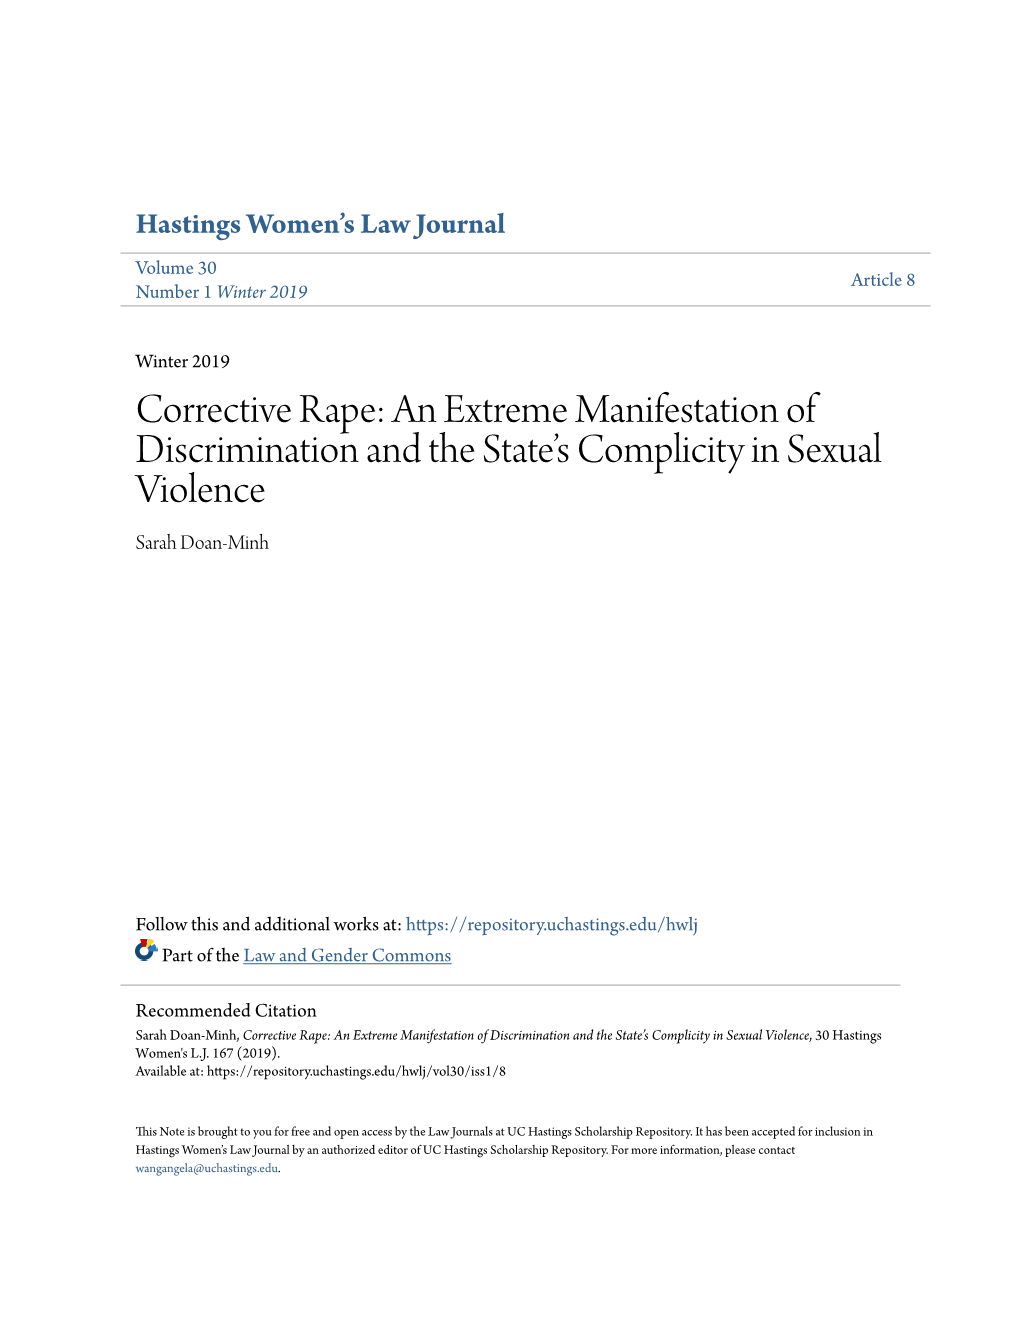 Corrective Rape: an Extreme Manifestation of Discrimination and the State’S Complicity in Sexual Violence Sarah Doan-Minh